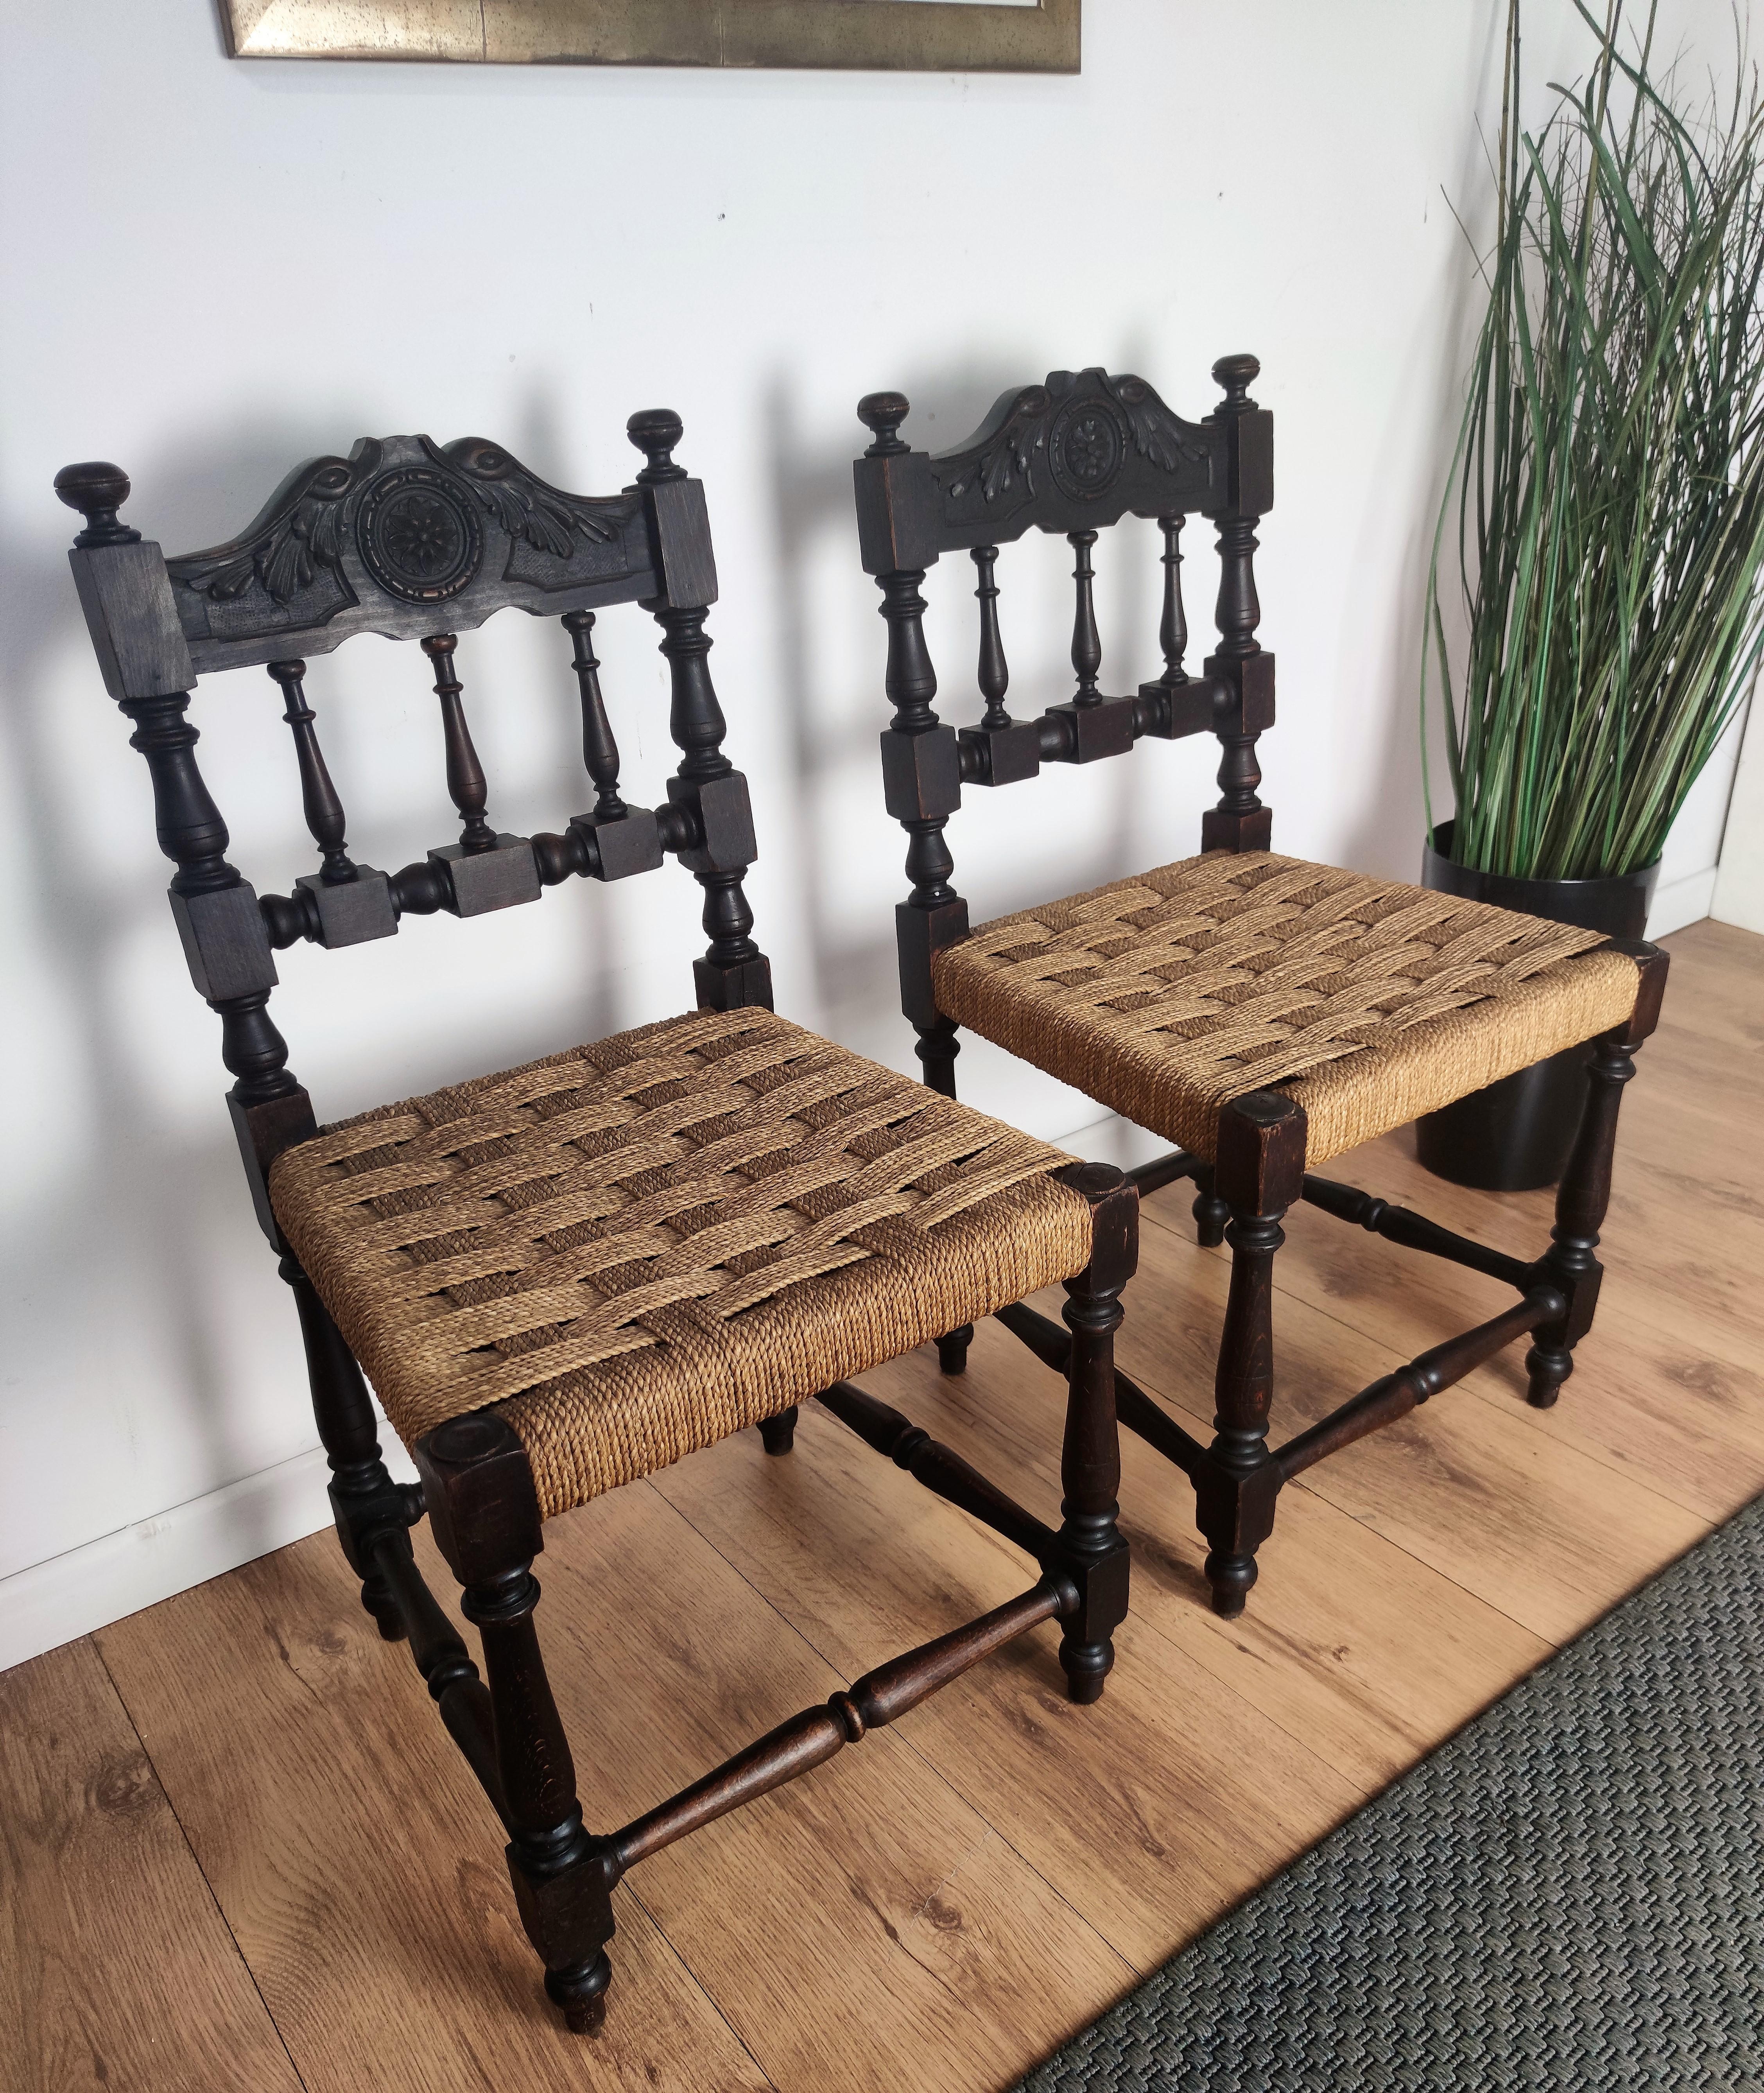 20th Century Pair of 1960s Italian Midcentury Carved Wood and Cord Woven Rope Chairs Stools For Sale